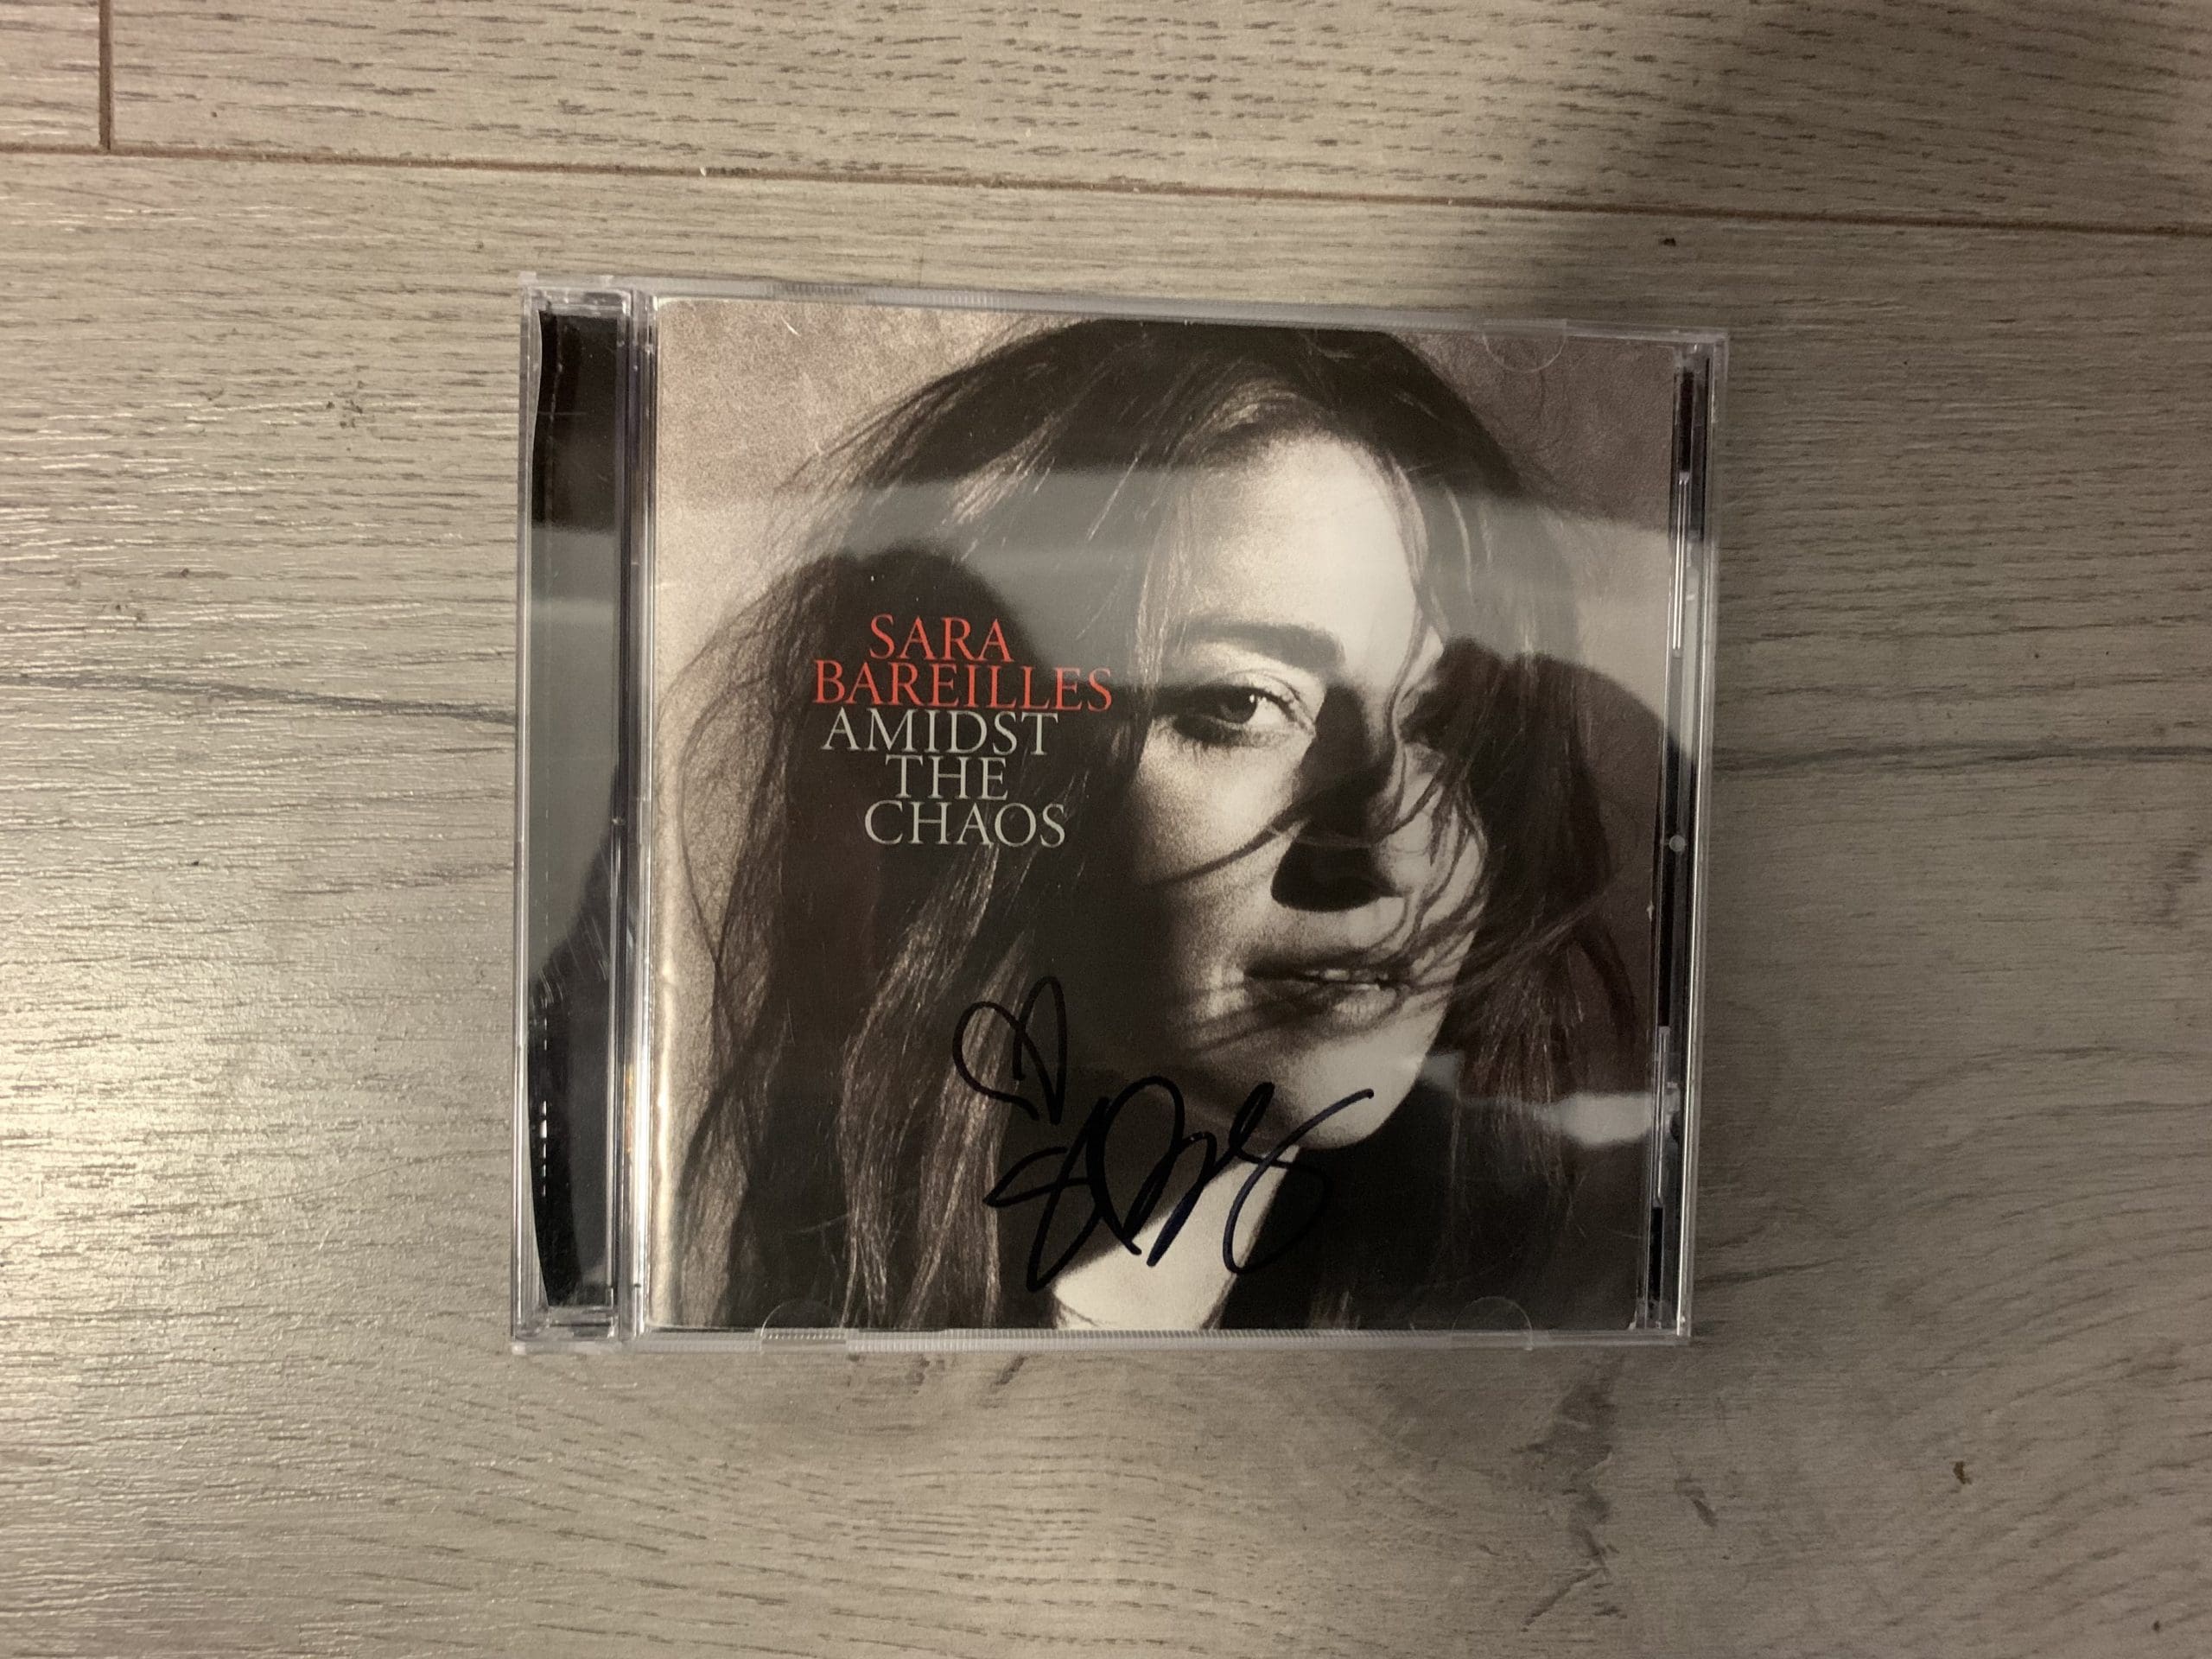 Enter our competition for a chance to win a signed Sara Bareilles Amidst the Chaos CD